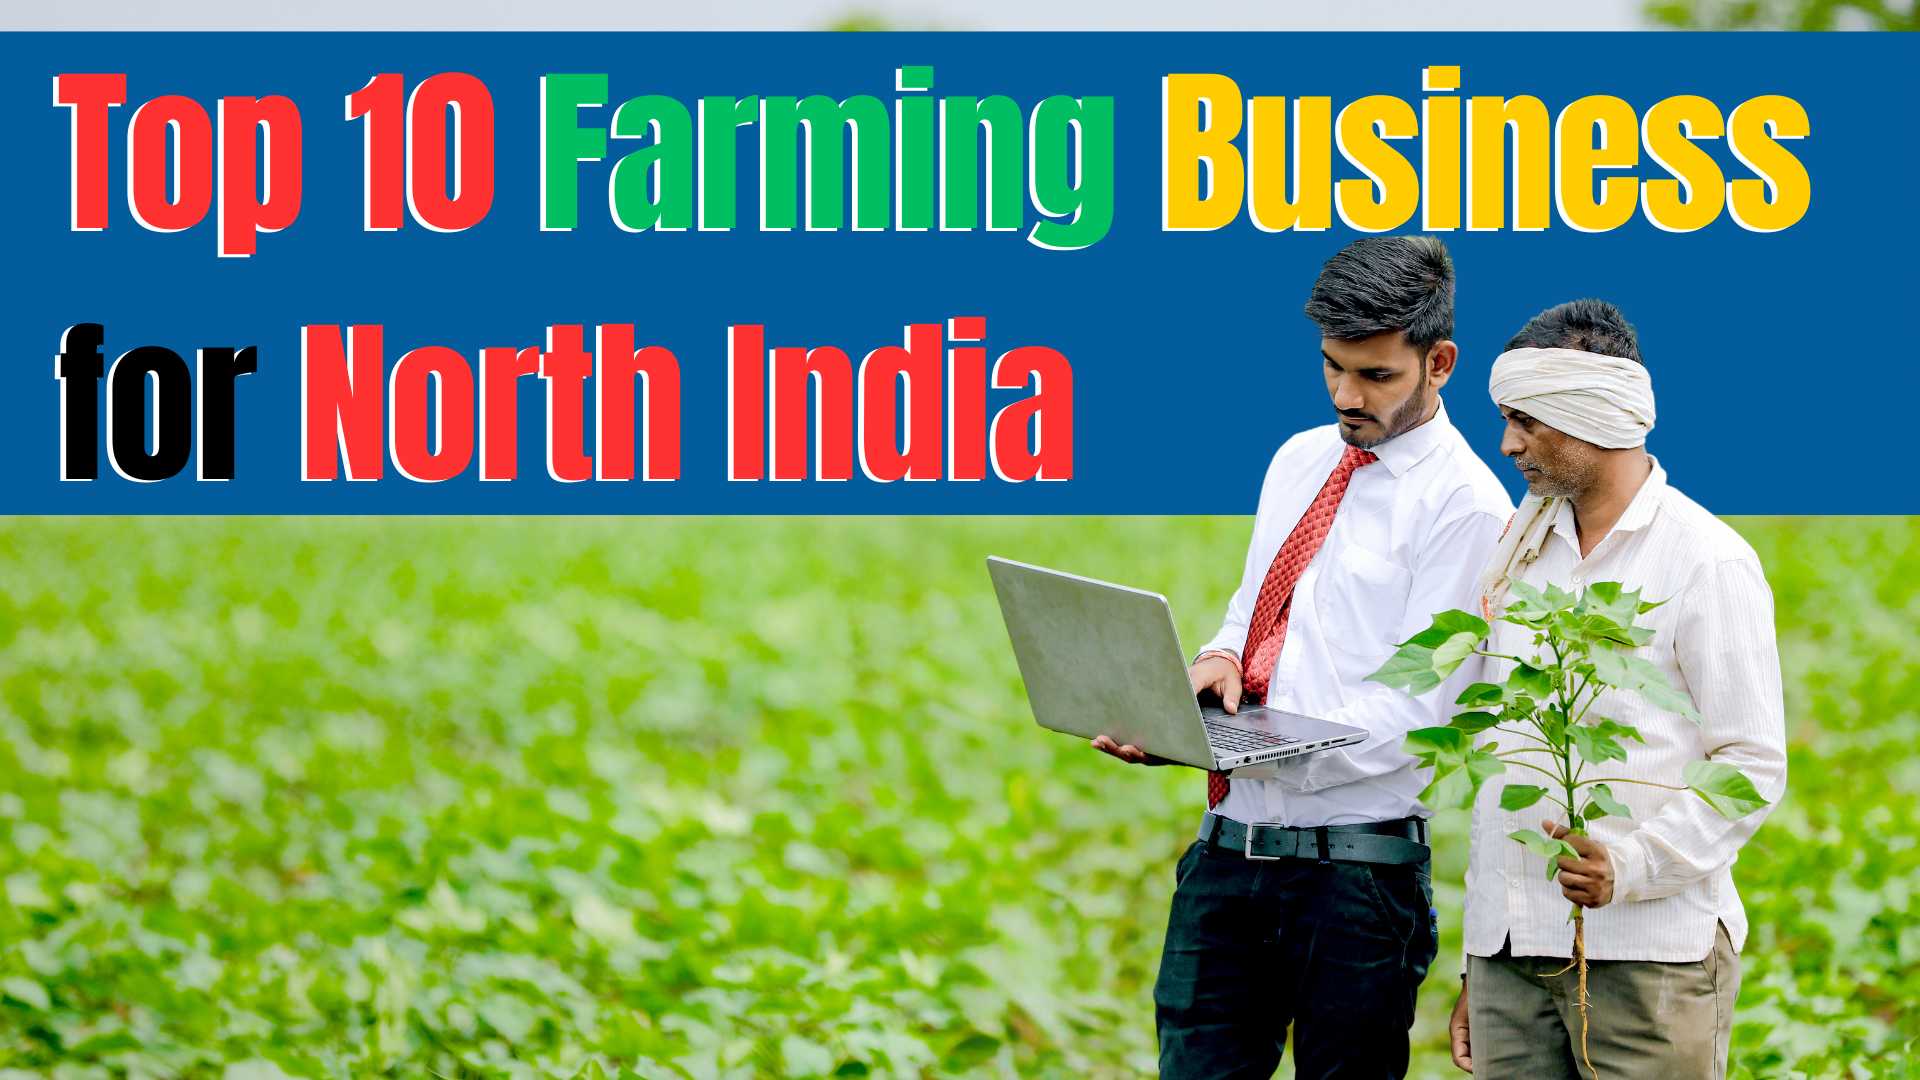 Top 10 Farming Business for North India